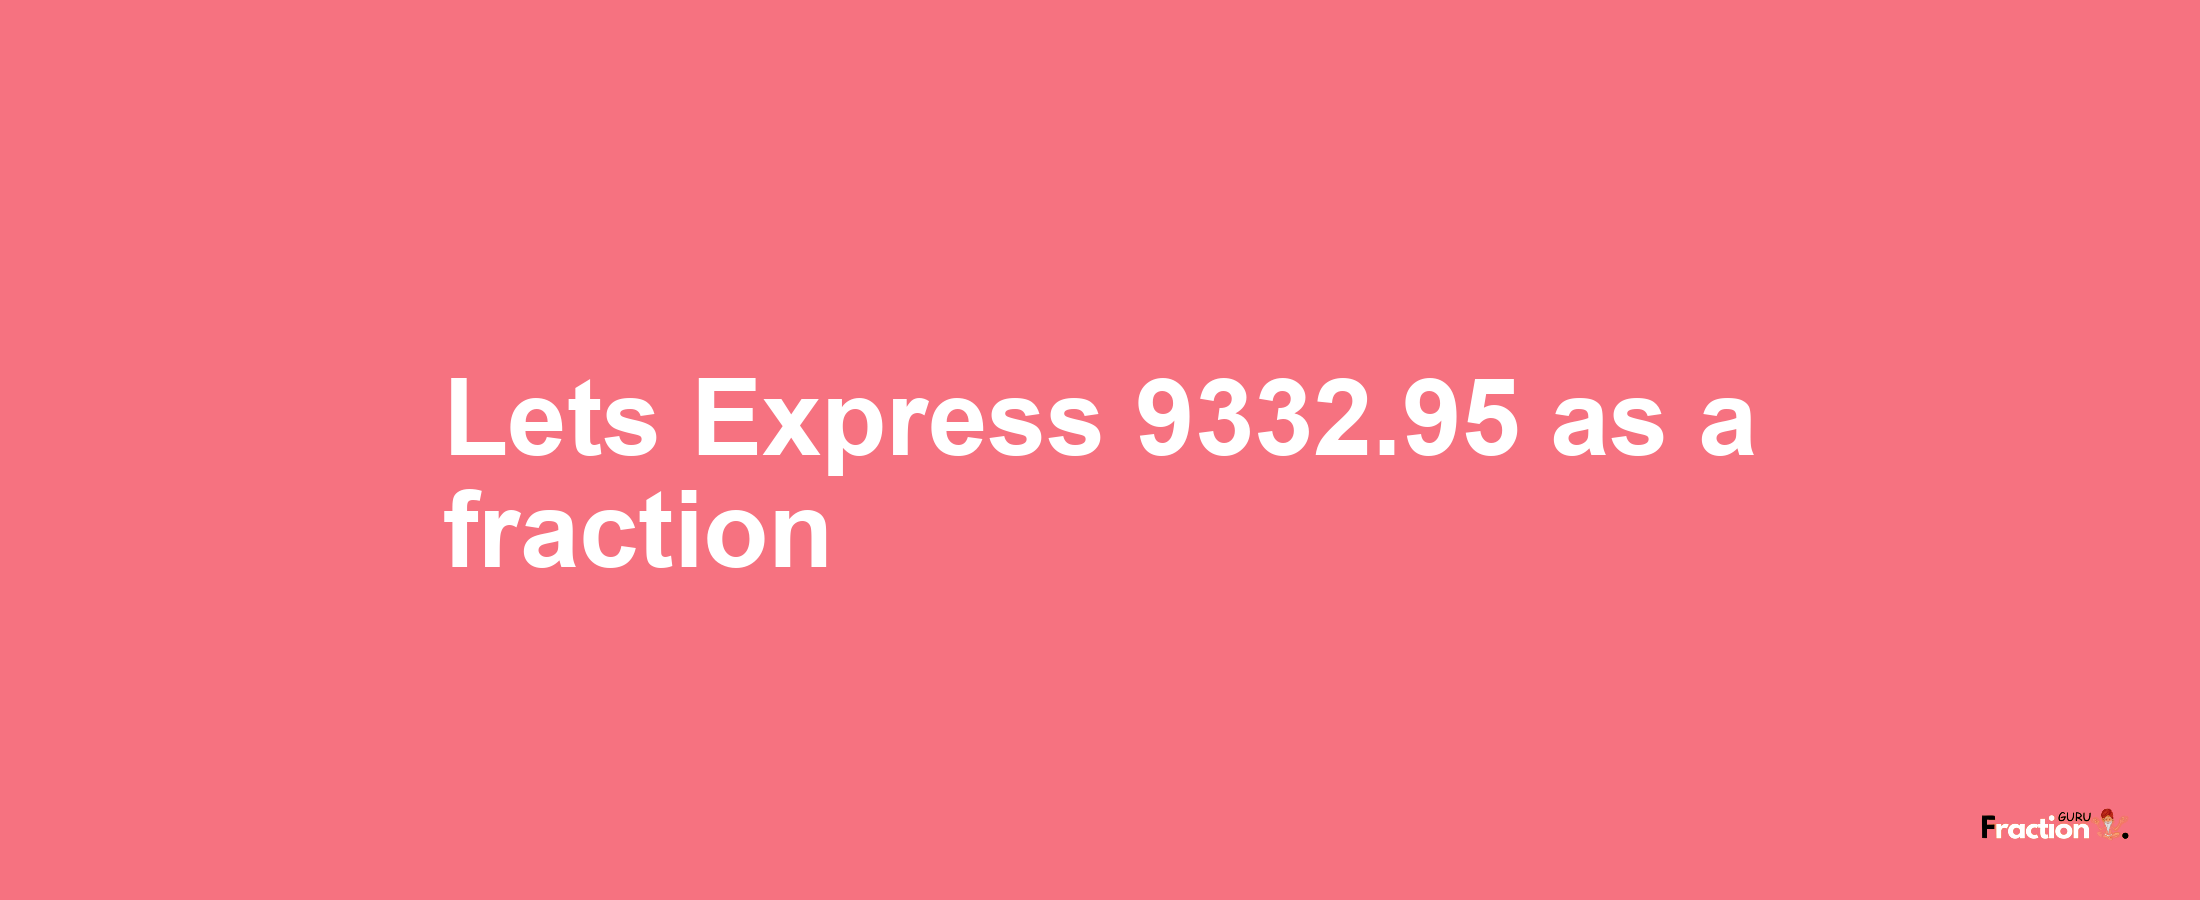 Lets Express 9332.95 as afraction